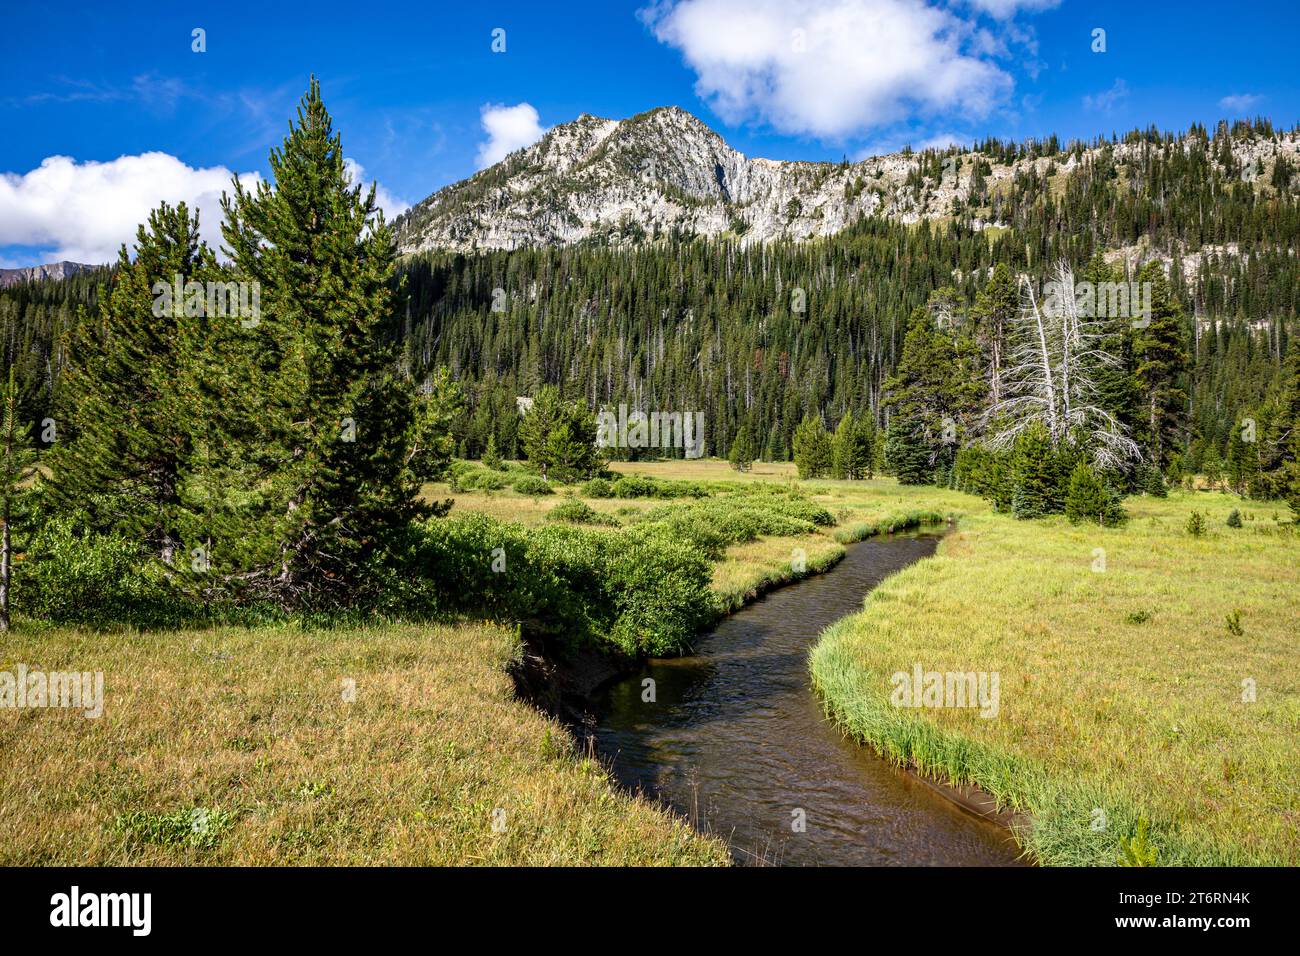 OR02700-00...OREGON - Meadows along the East Fork Wallowa Trail in the, part of the Eagle Cap Wilderness area. Stock Photo